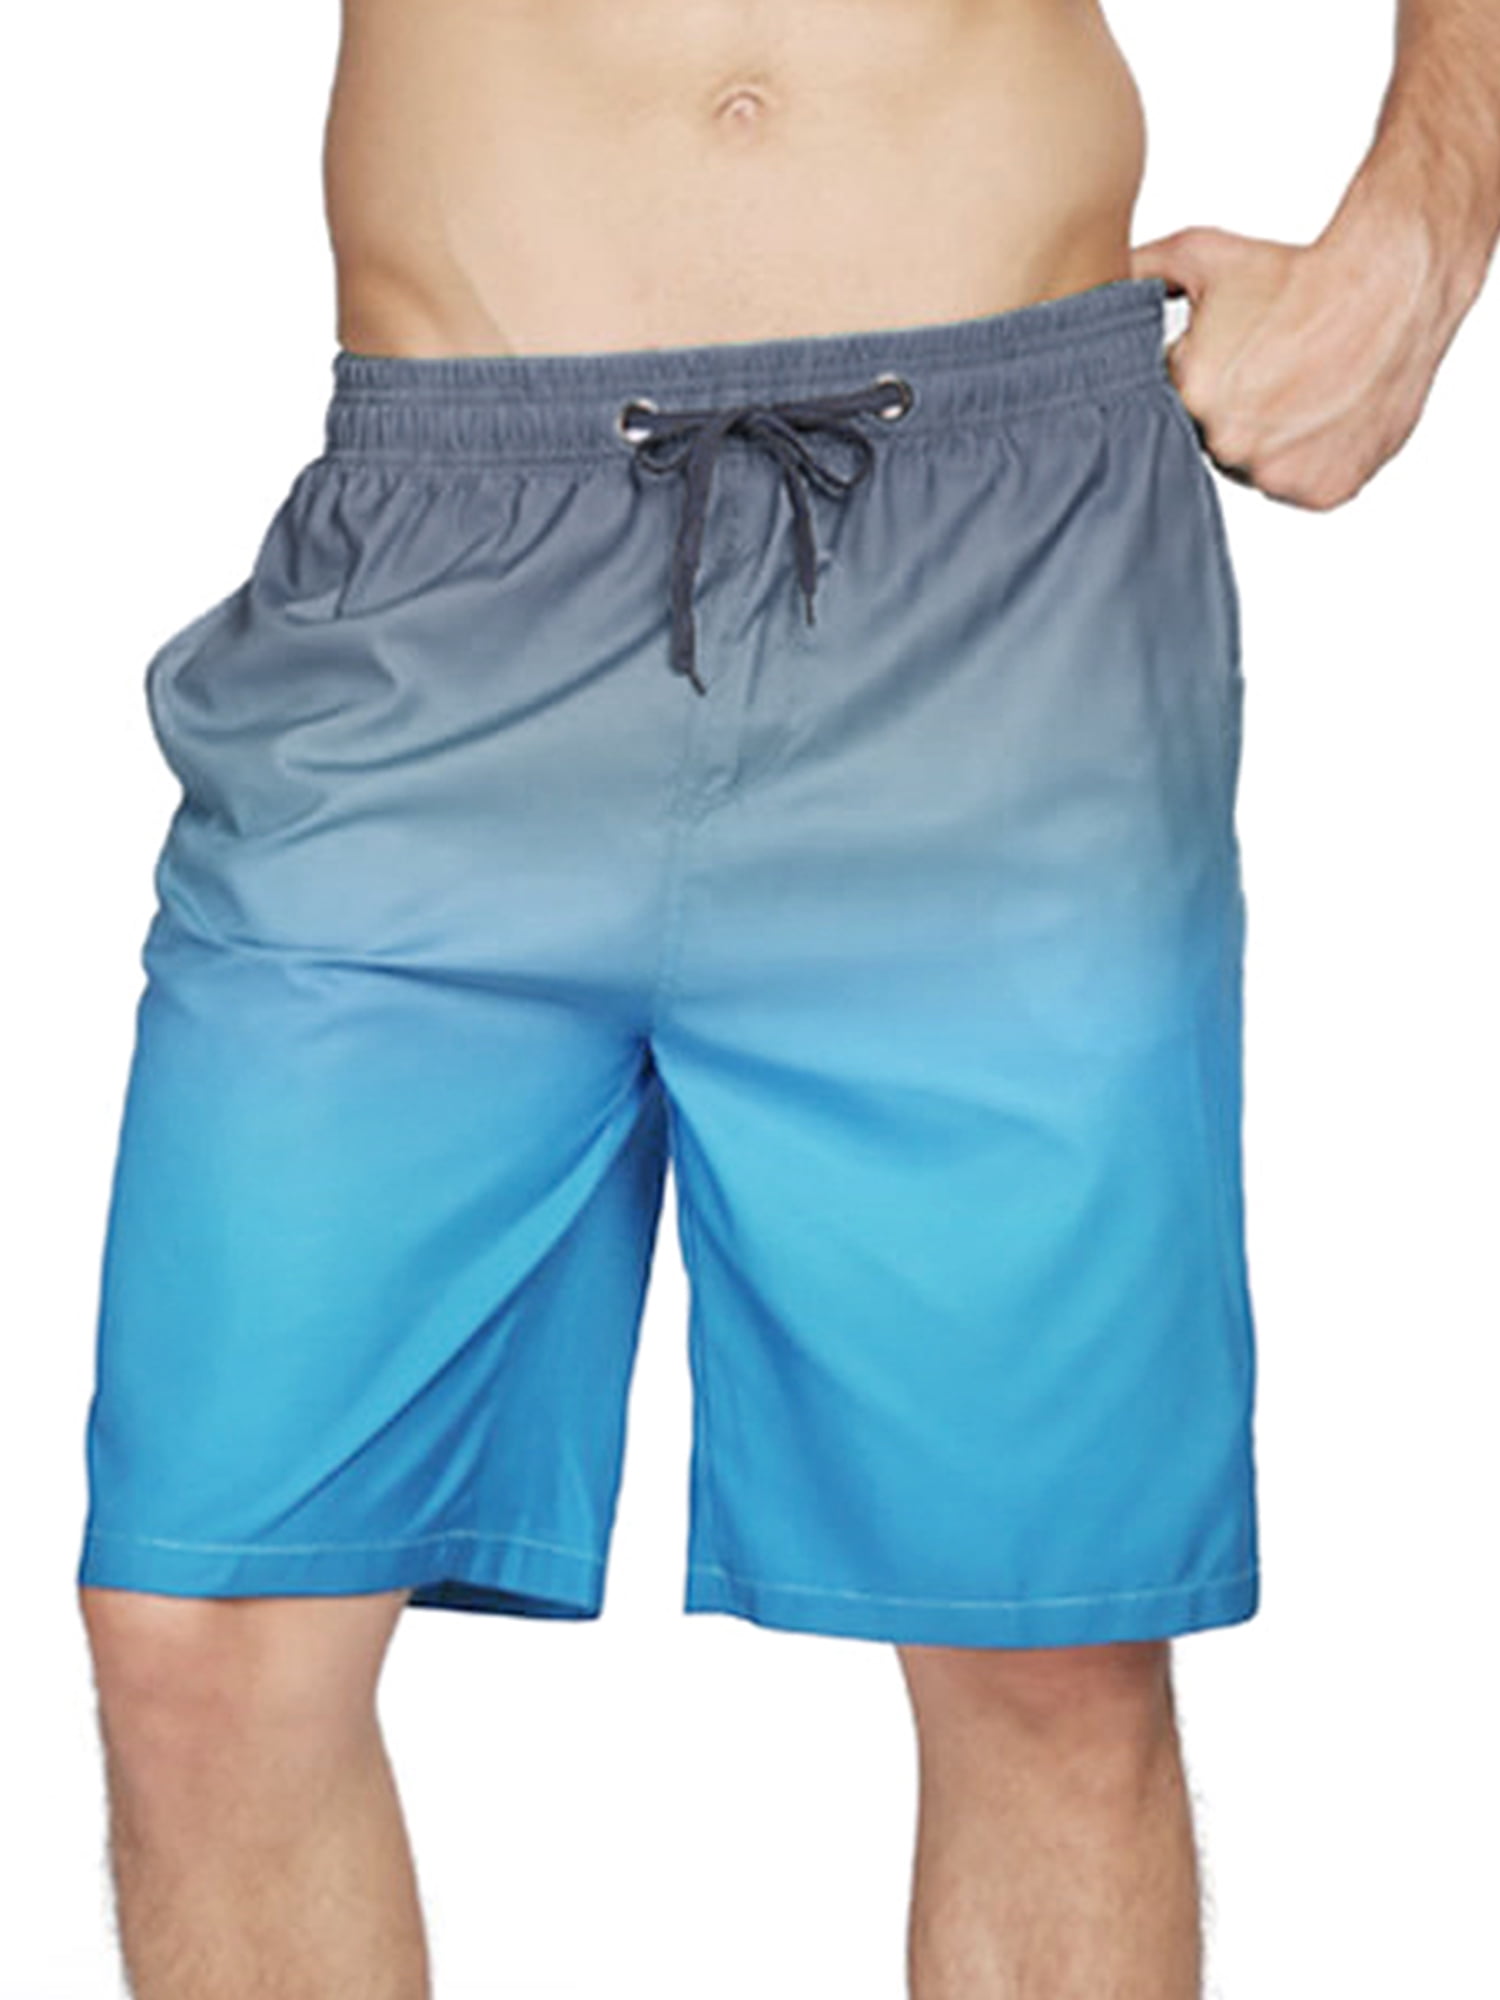 Snow Mountains Mens Beach Shorts Classic Surfing Trunks Surf Board Pants with Pockets for Men 